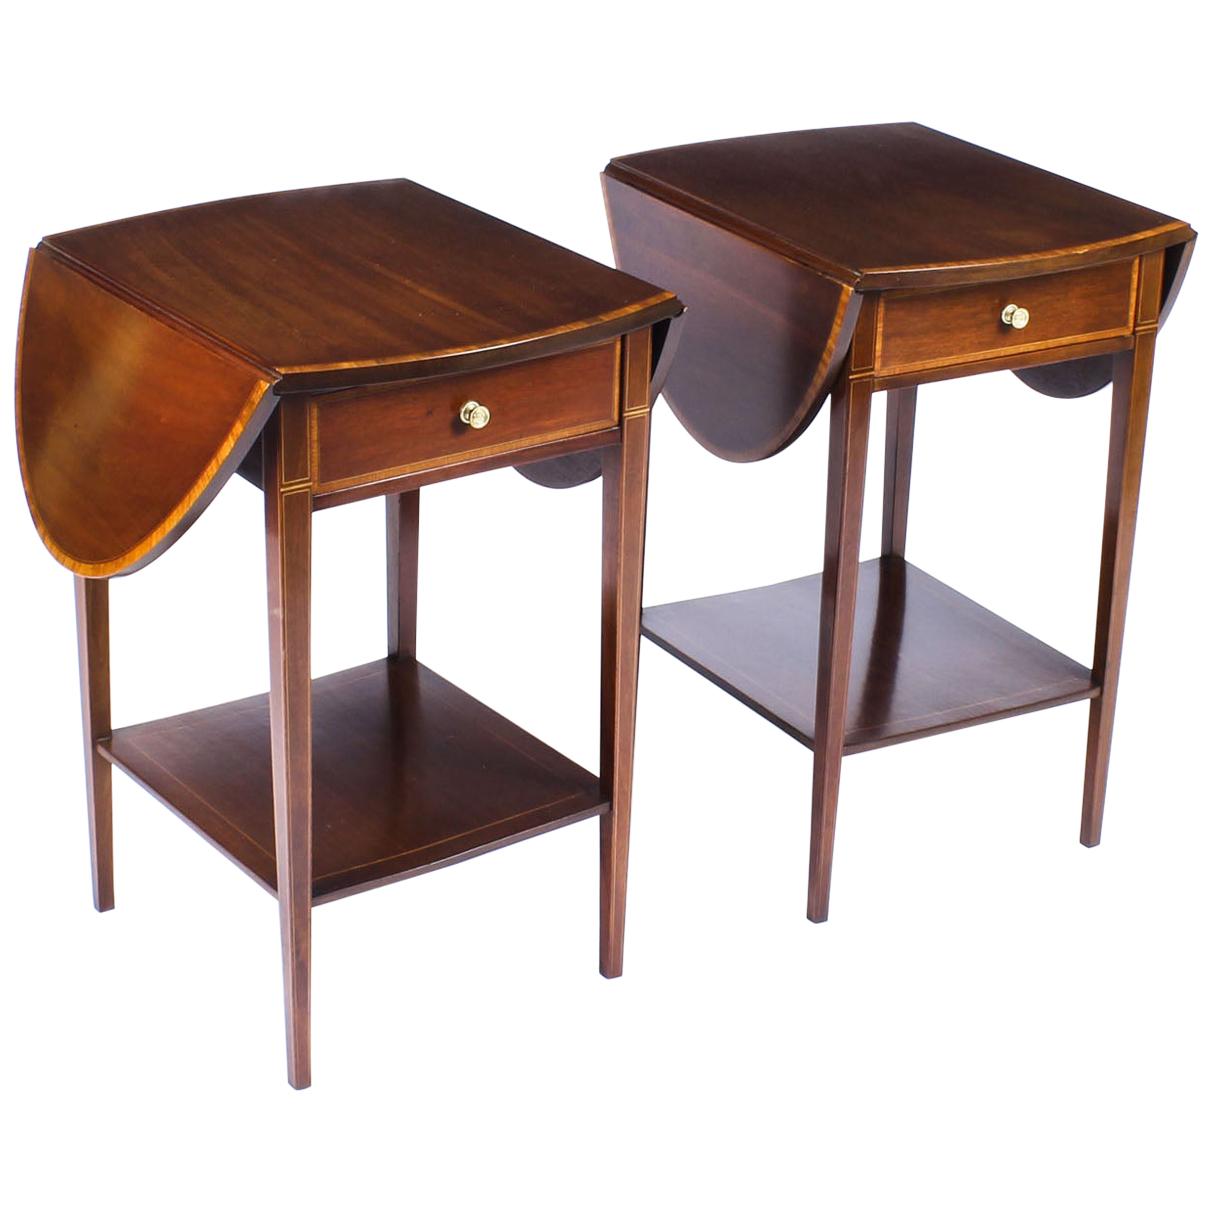 Antique Pair of Edwardian Inlaid Mahogany Bedside Tables, 19th Century